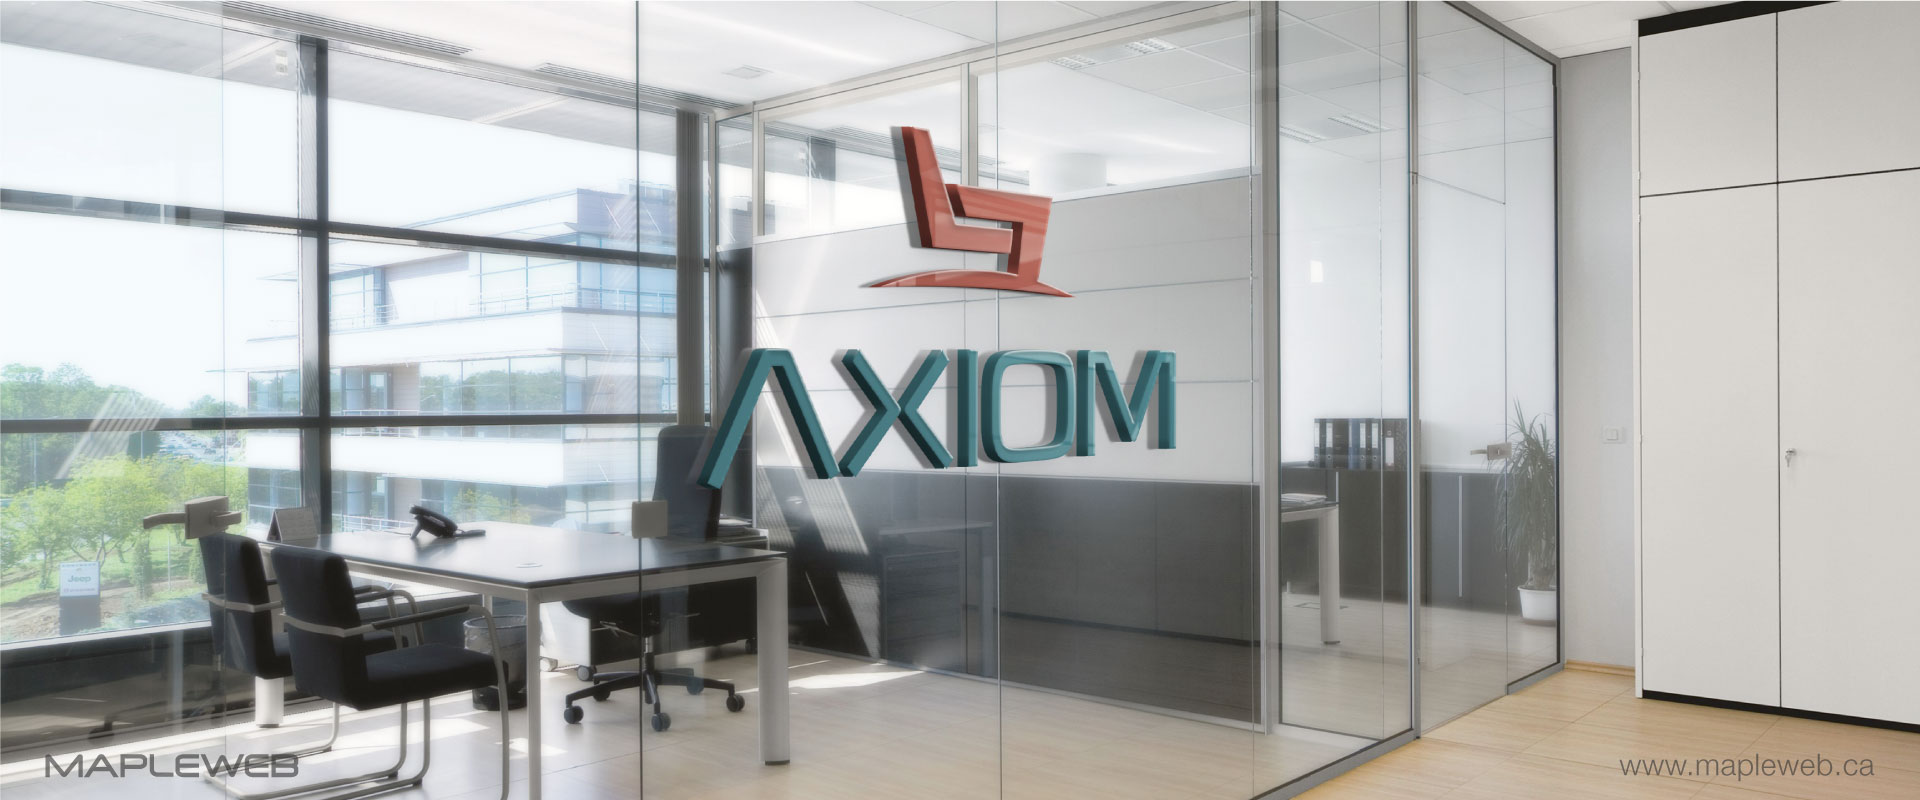 axiom-office furniture-brand-logo-design-by-mapleweb-vancouver-canada-glass-mock